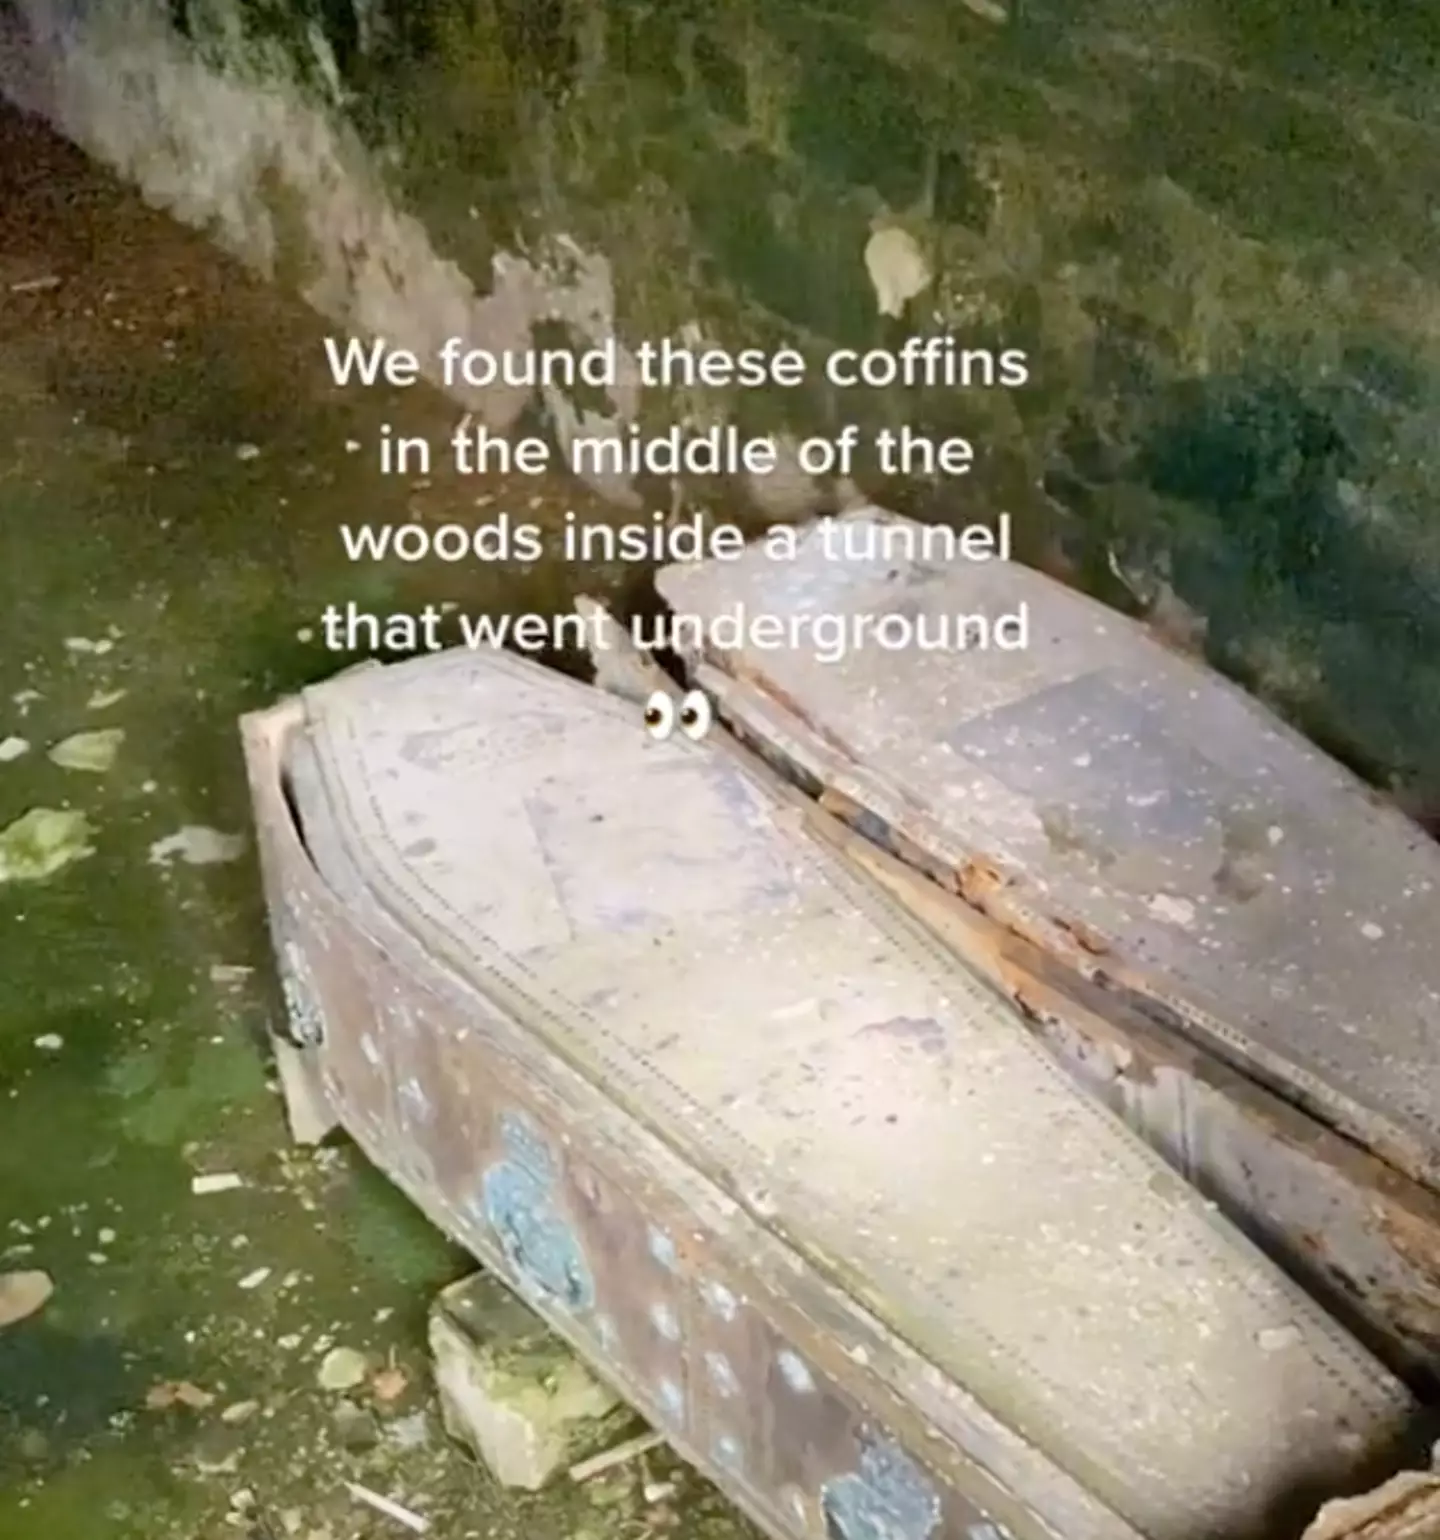 Four coffins were discovered by a TikToker and explorer when wandering the woods.